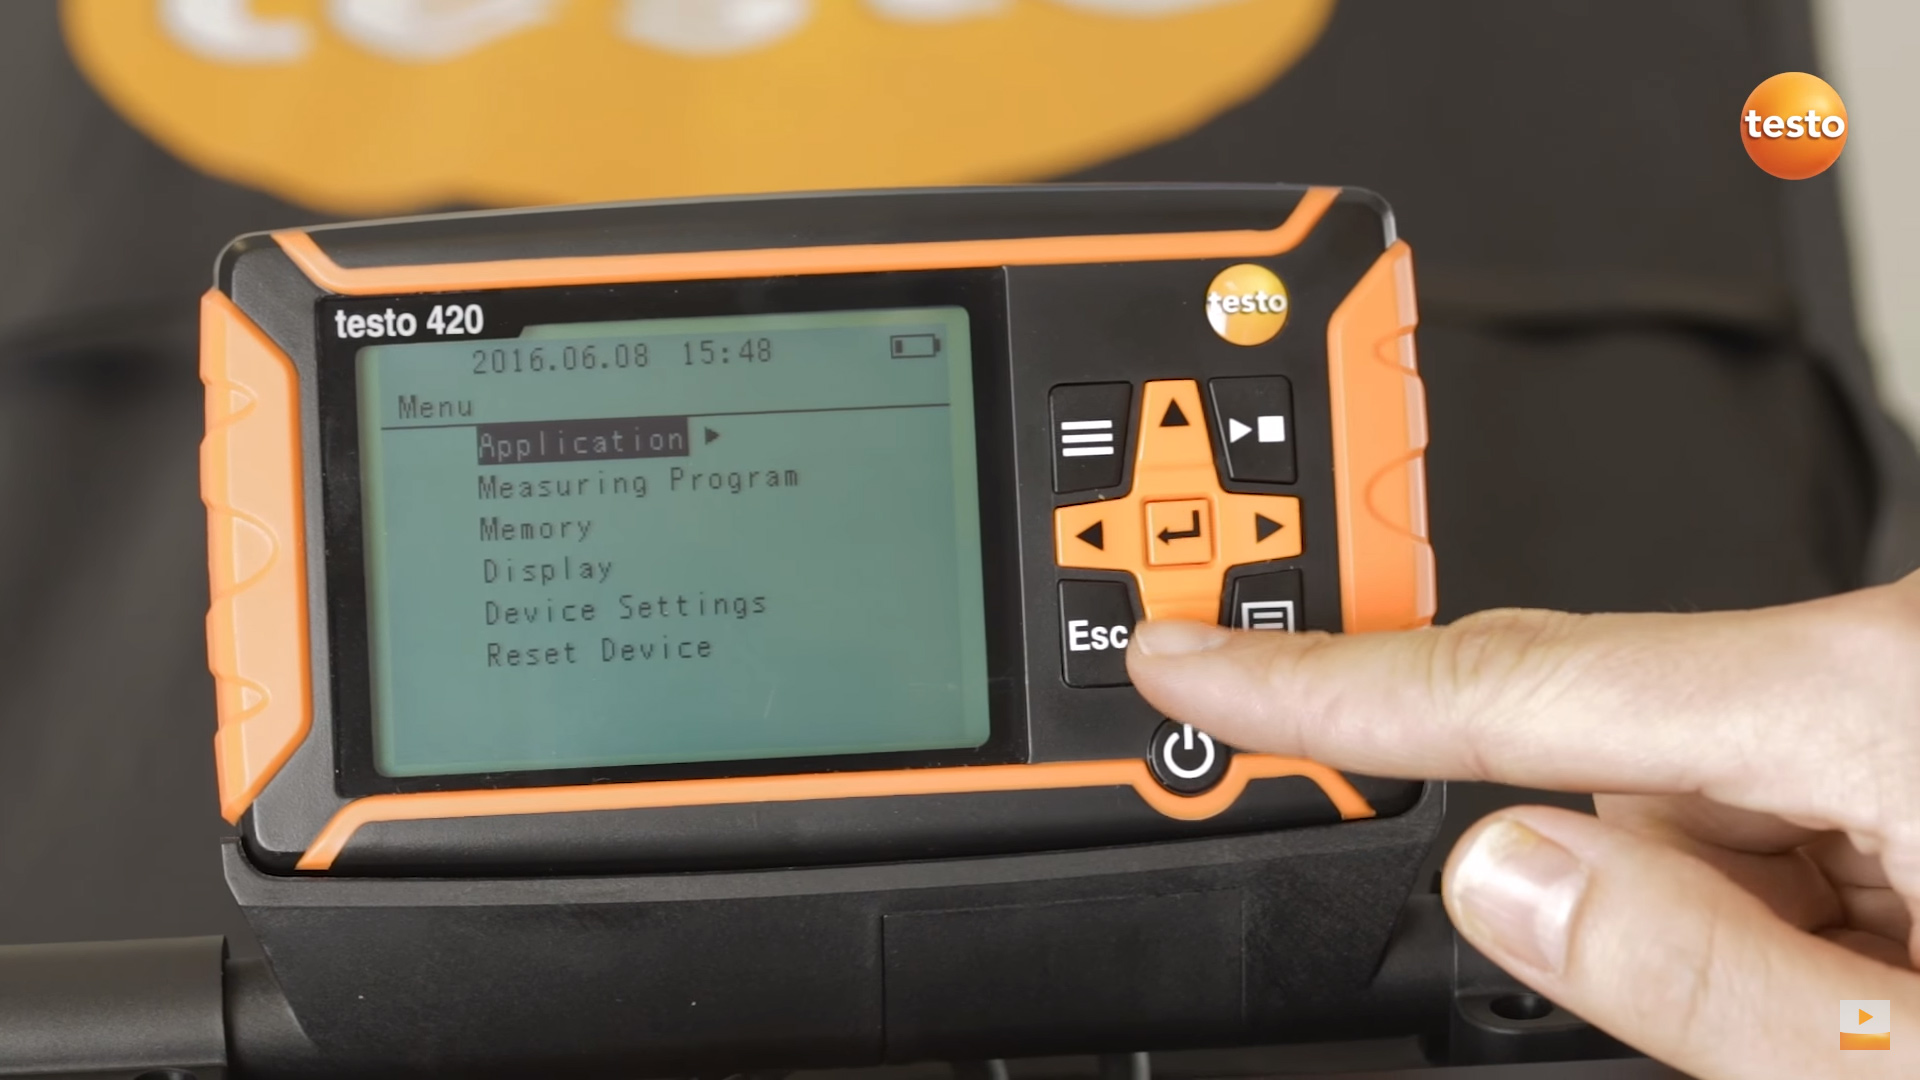 A close up of the Testo 420 Differential Pressure Measuring Instrument menu screen.